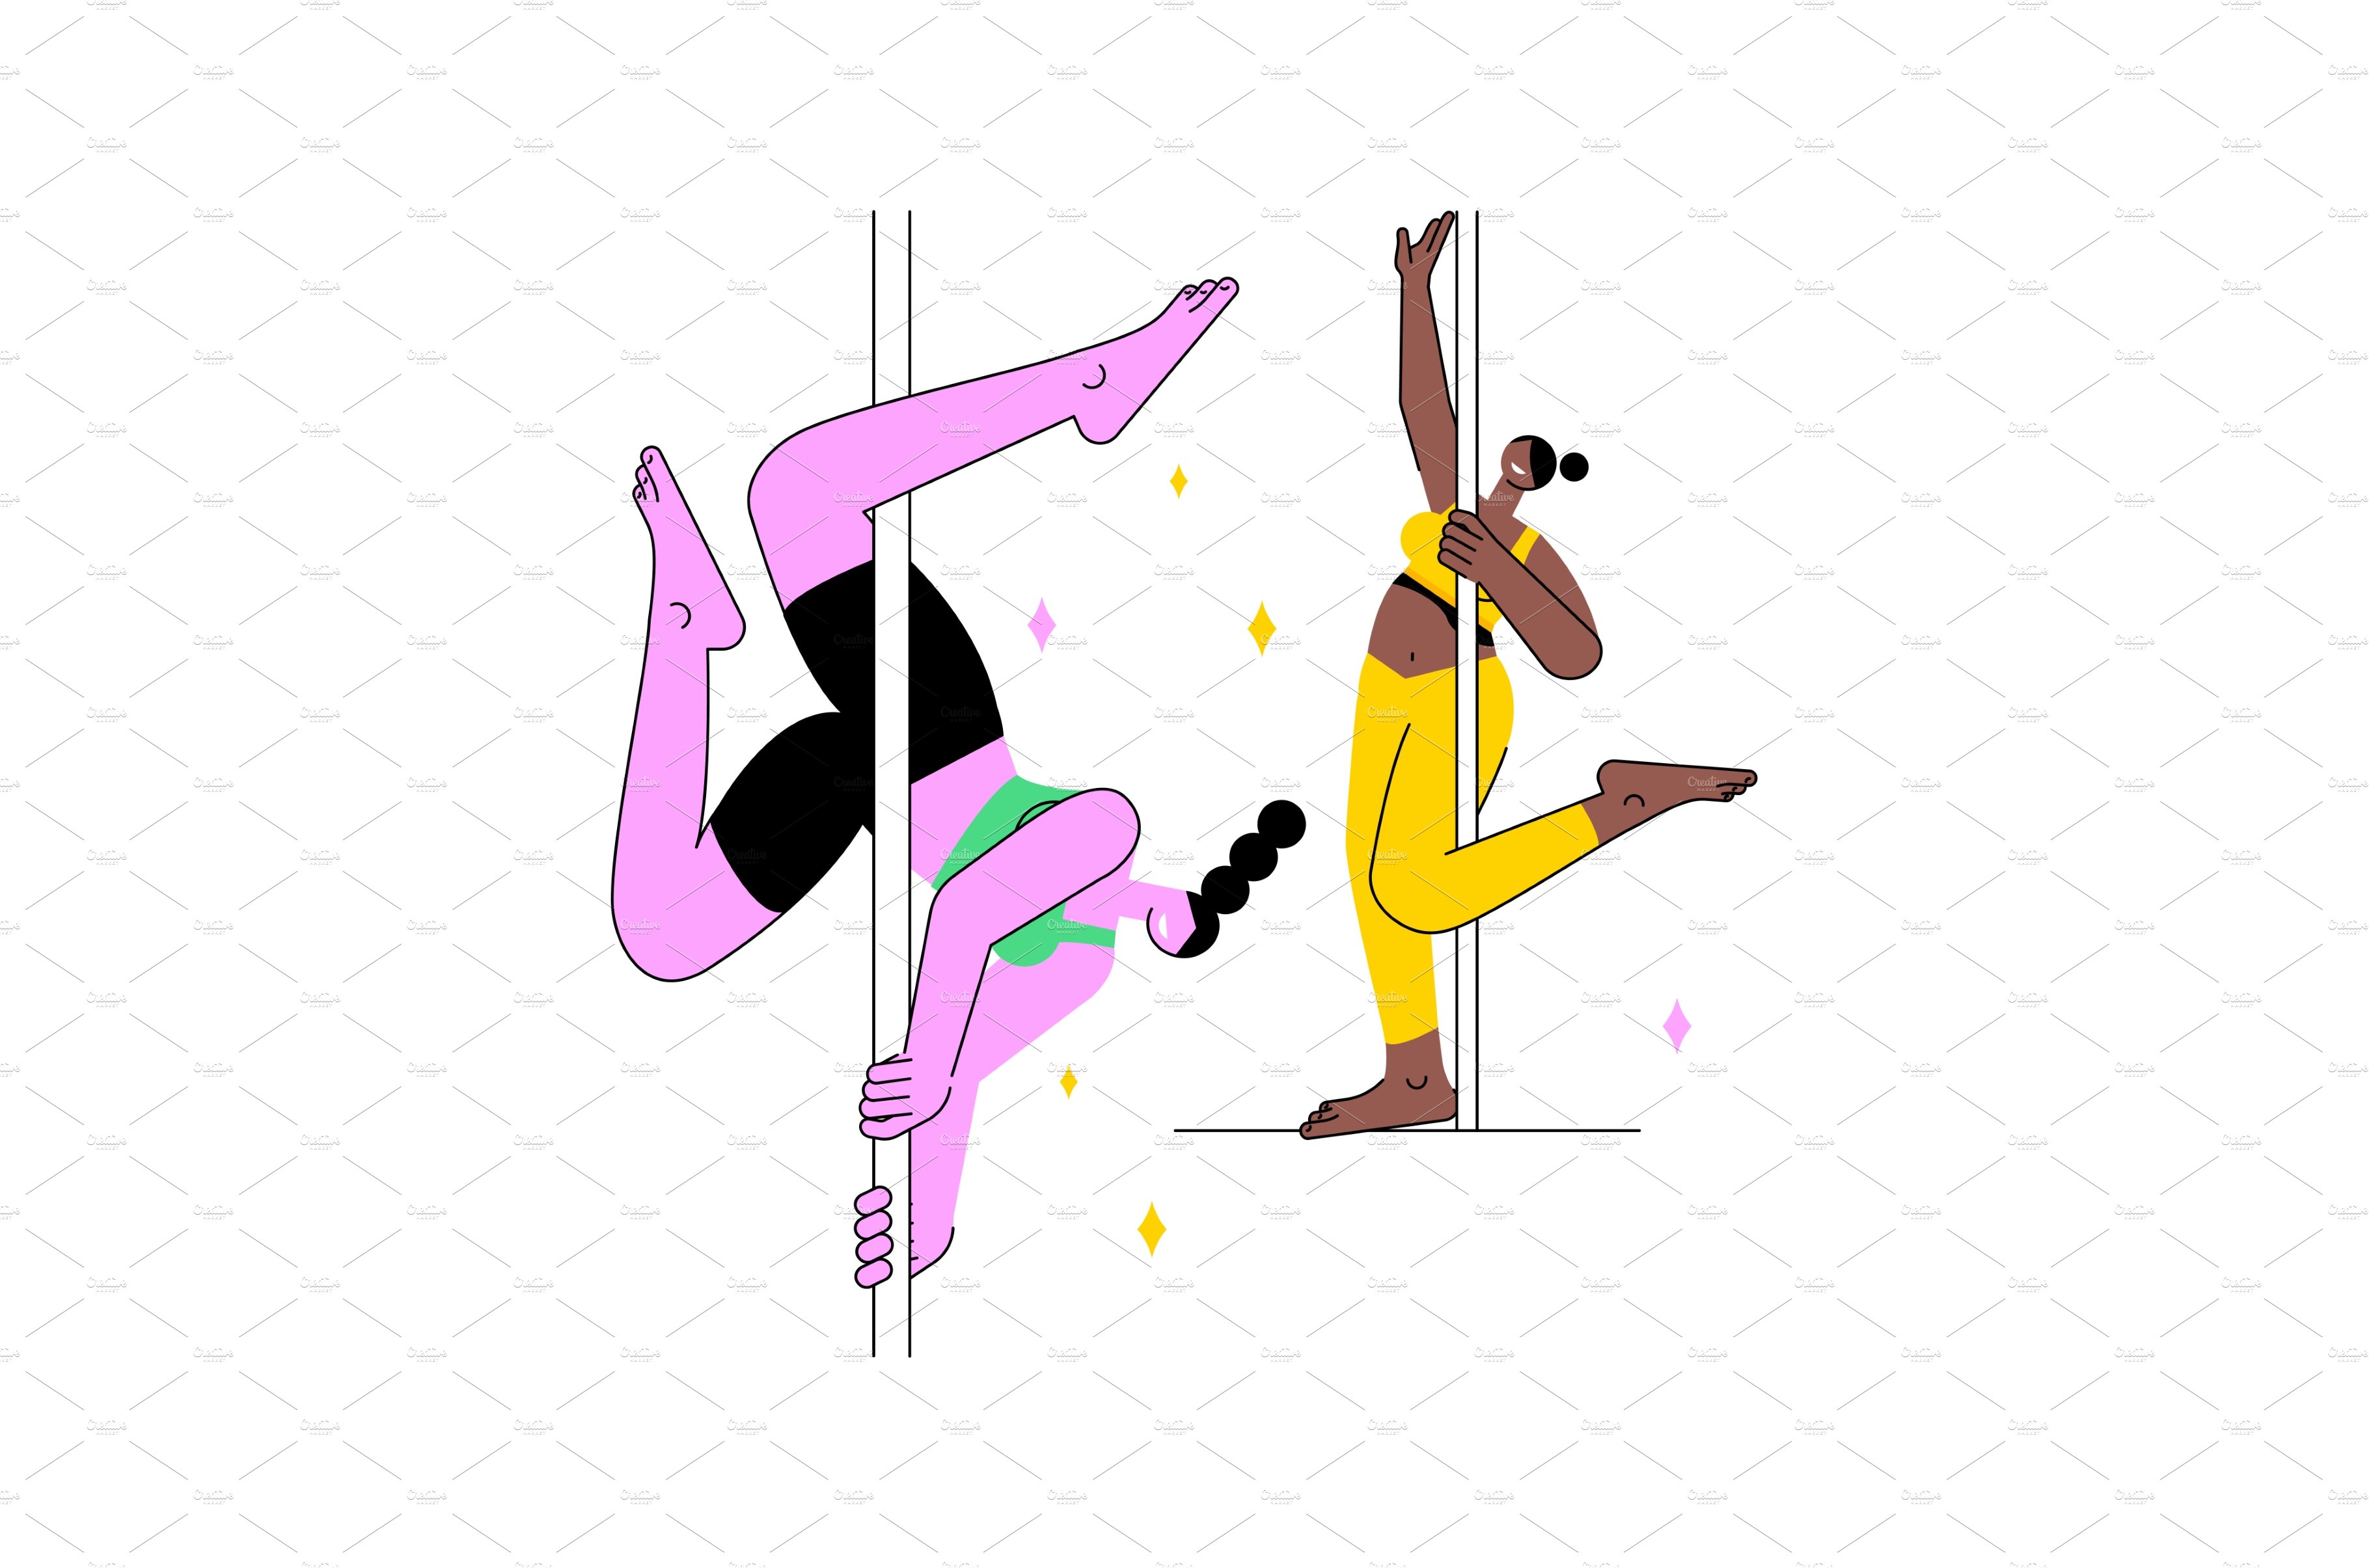 Pole dance classes isolated cartoon cover image.